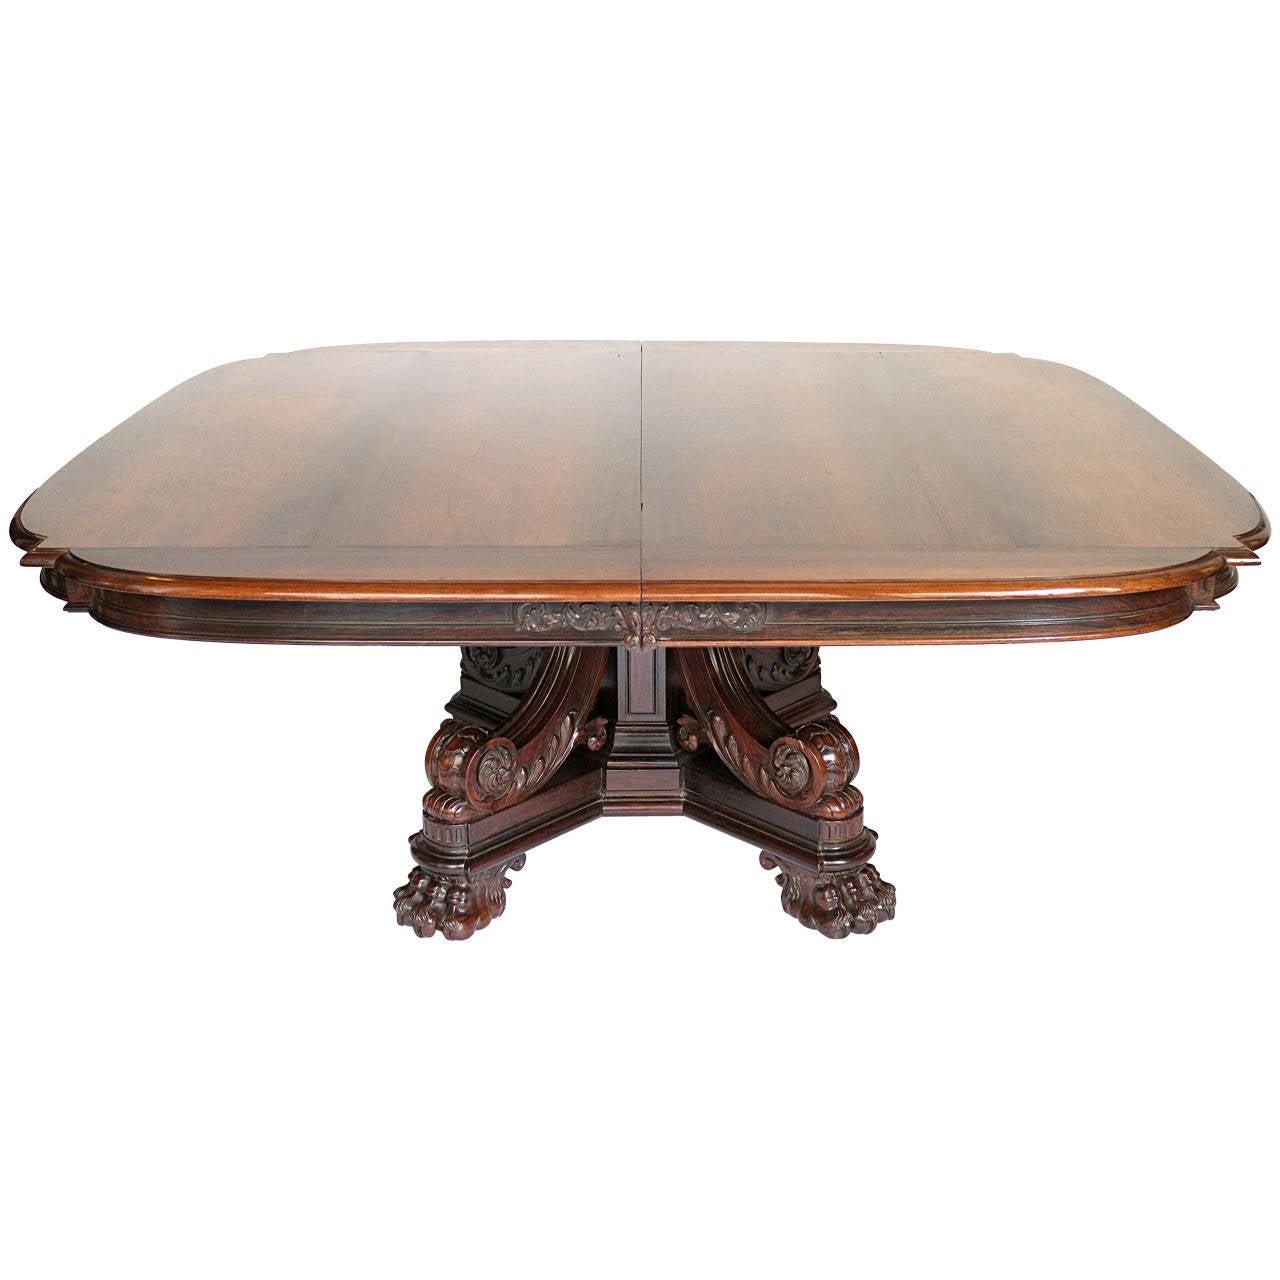 Very important extension table on central feed with three extra new leafs in the finest Rio rosewood.
Signed by 